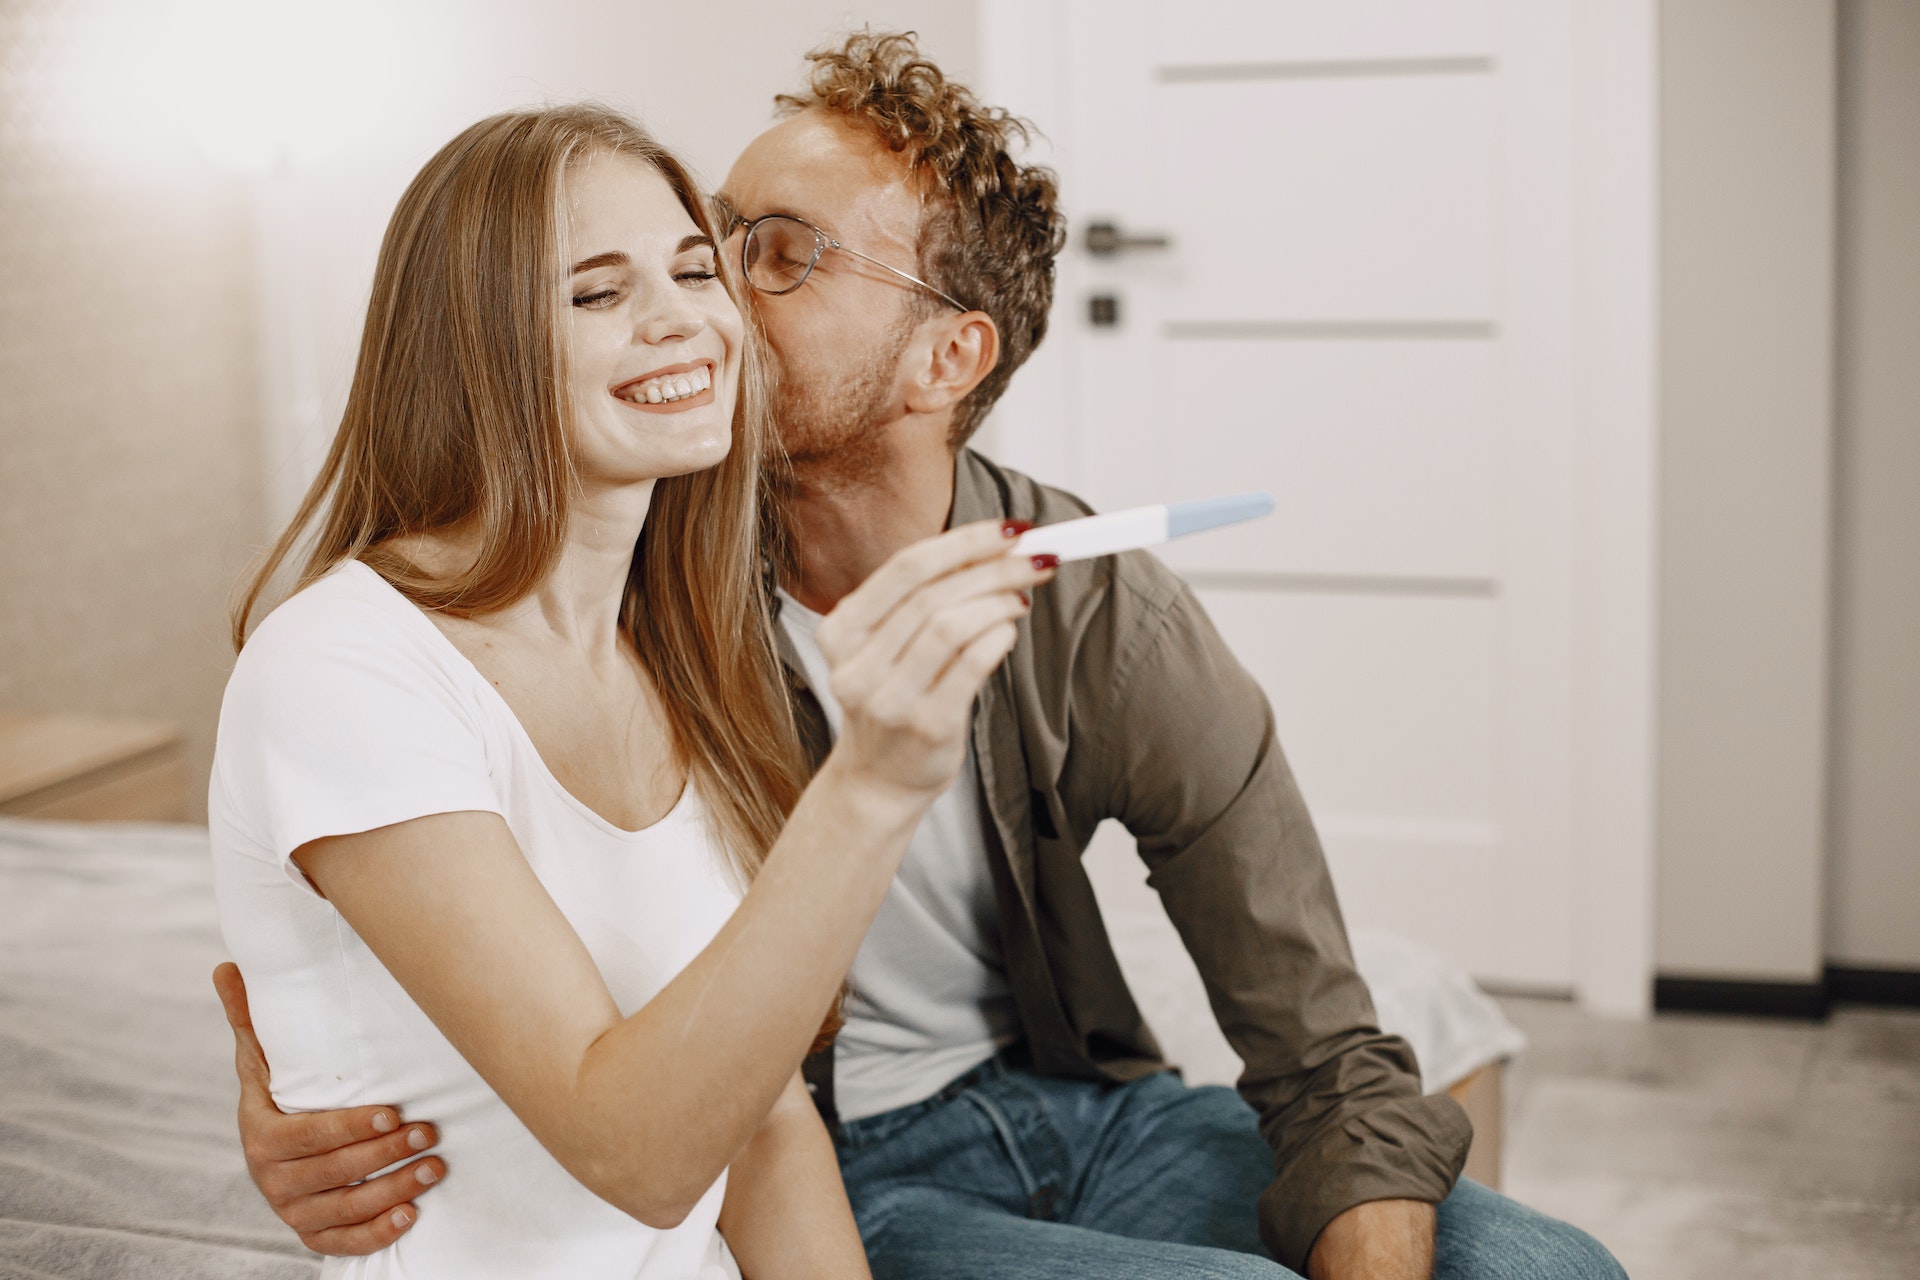 A woman holds a pregnancy testing kit while a man kisses her | Source: Pexels